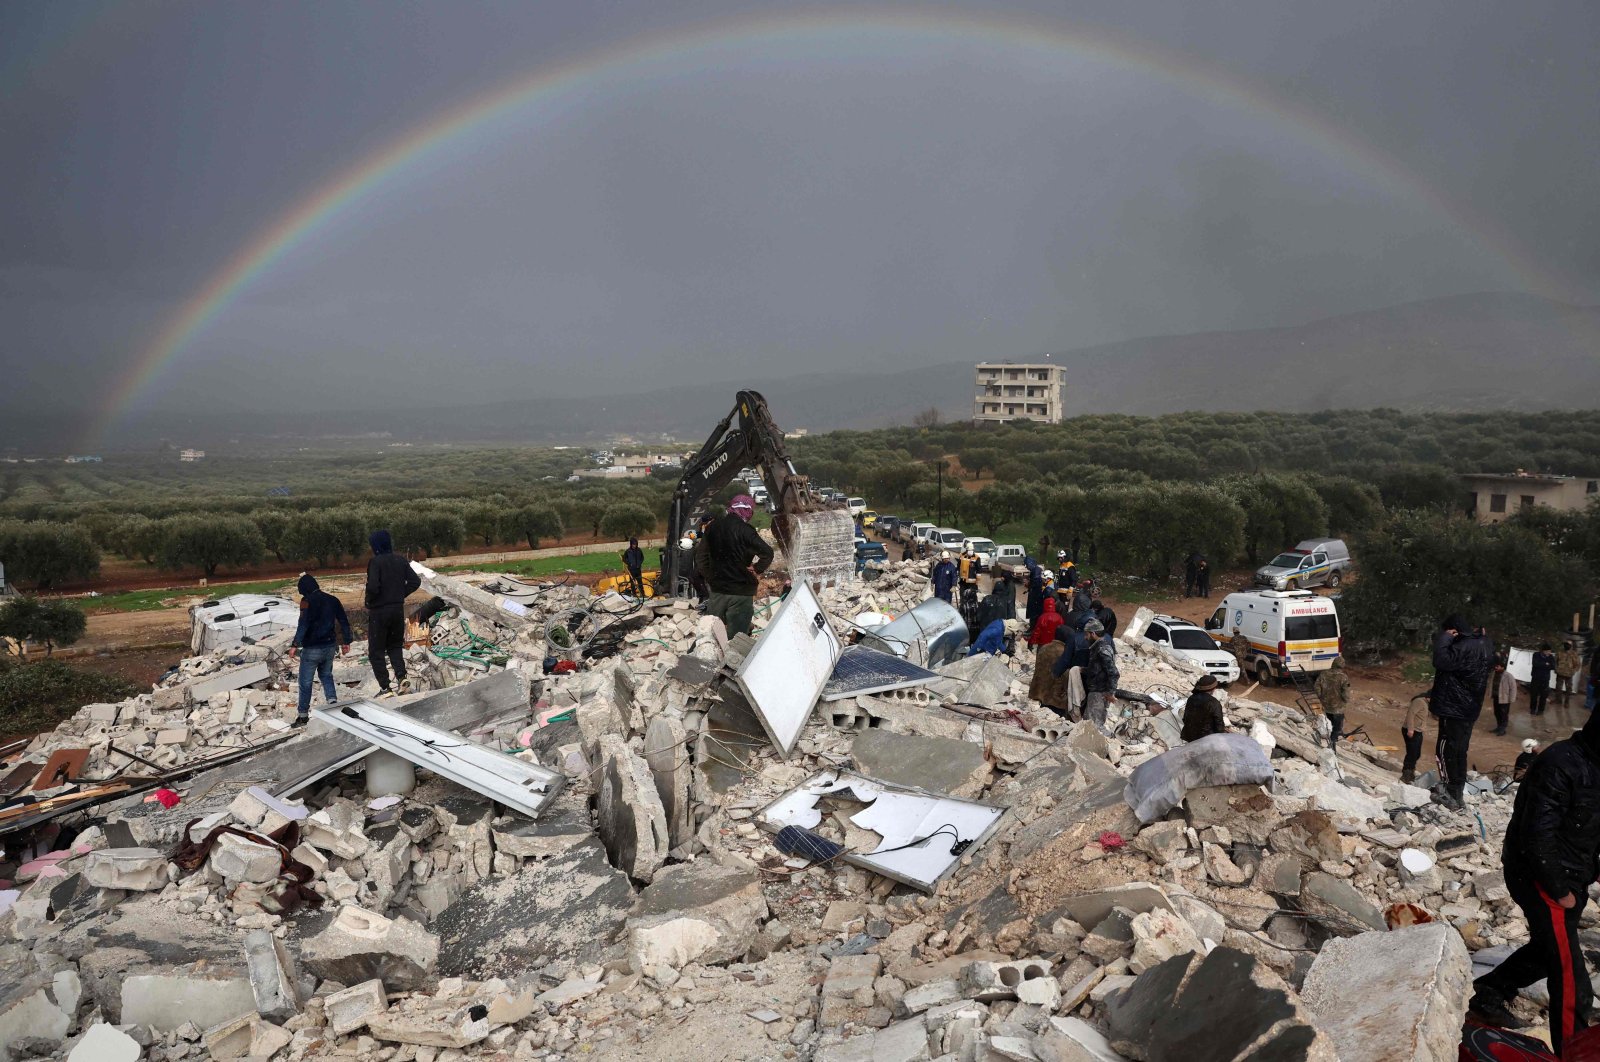 Residents search for victims and survivors amidst the rubble of collapsed buildings following an earthquake in the village of Besnaya in opposition-held Idlib, Syria, Feb. 6, 2022. (AFP Photo)